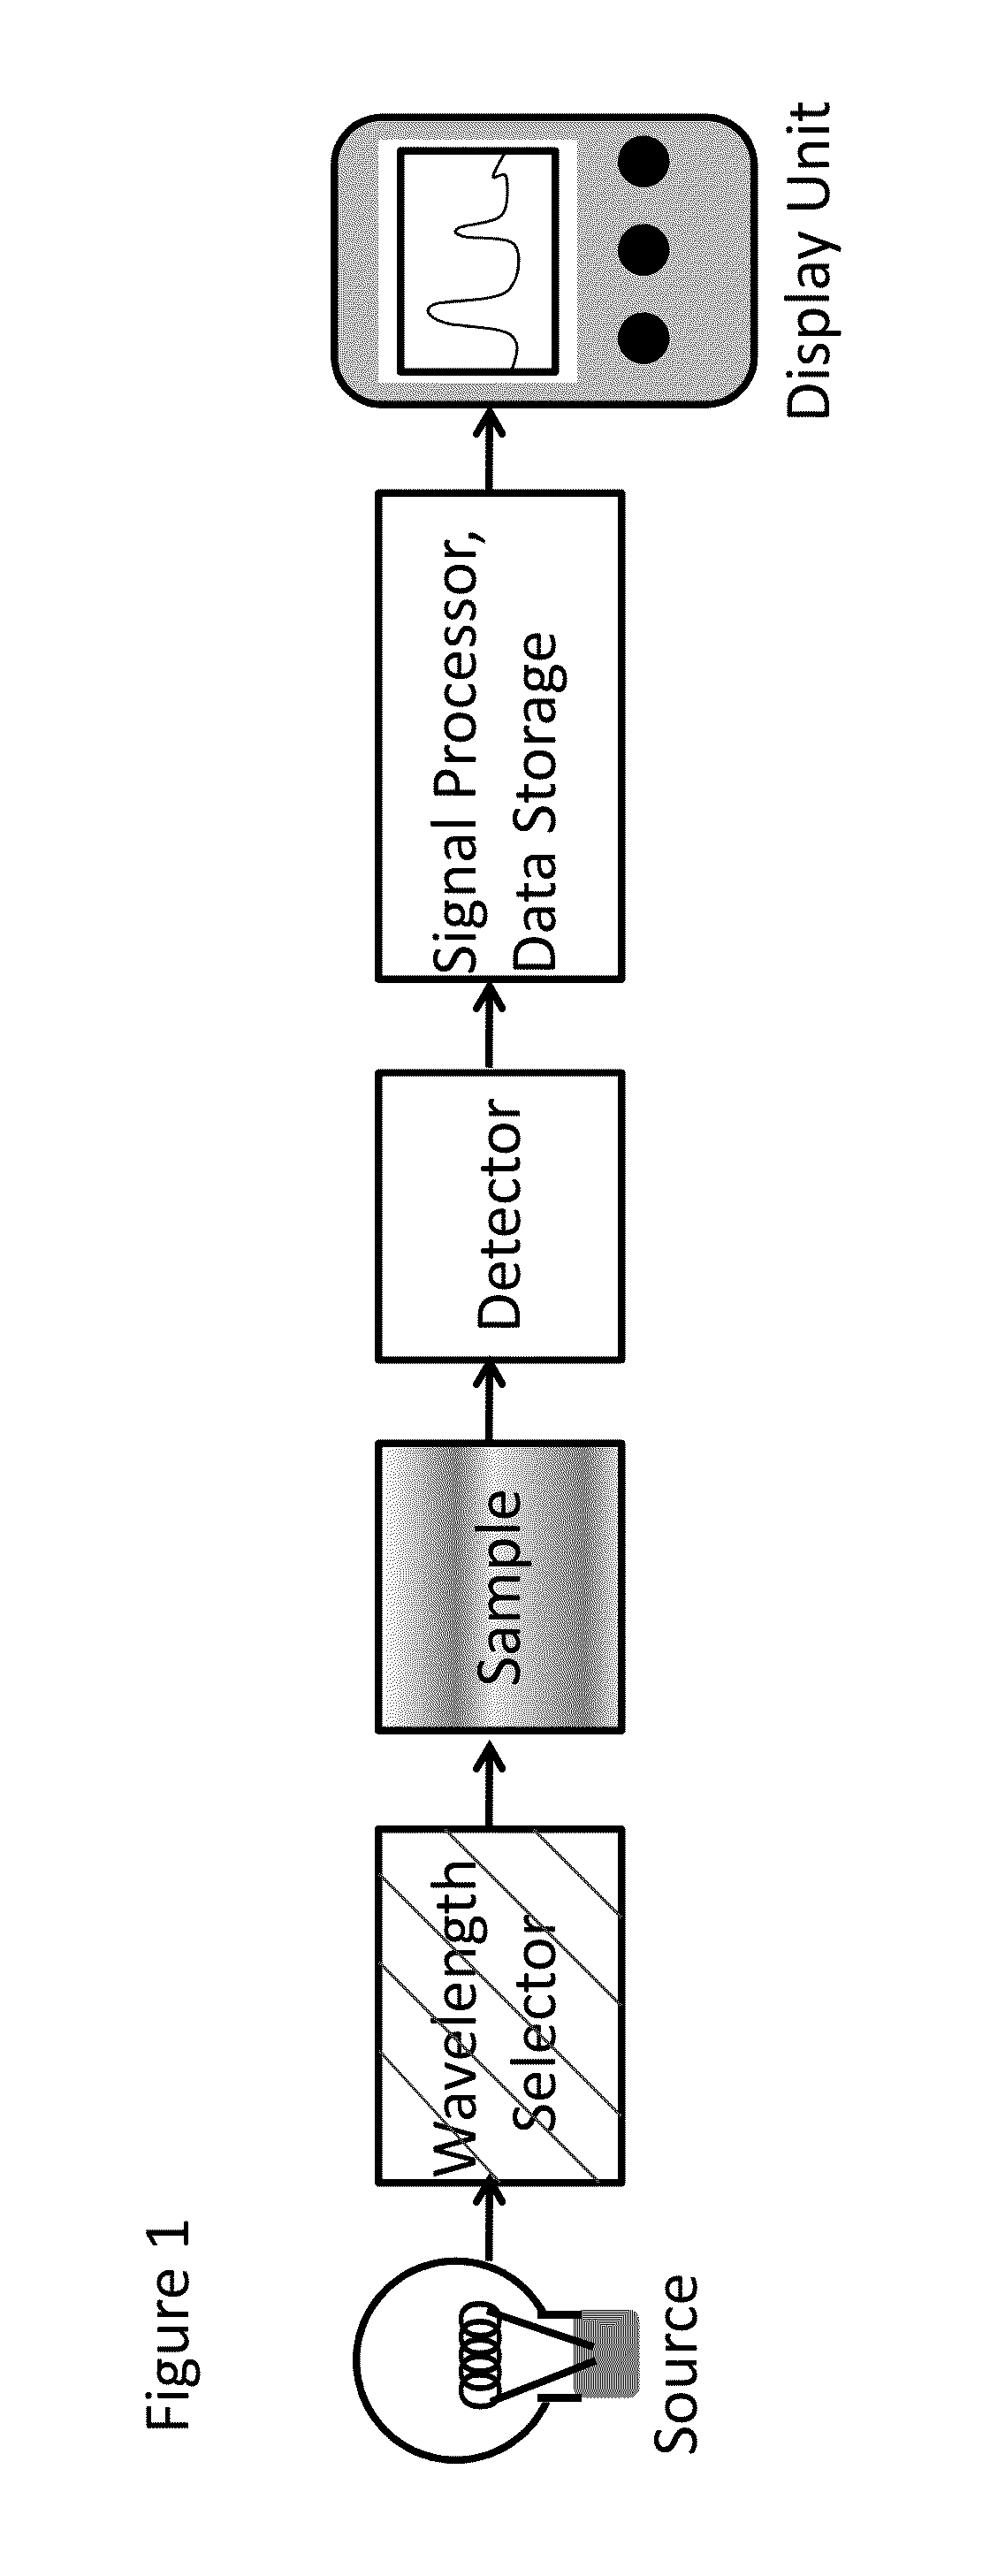 Method accounting for thermal effects of lighting and radiation sources for spectroscopic applications